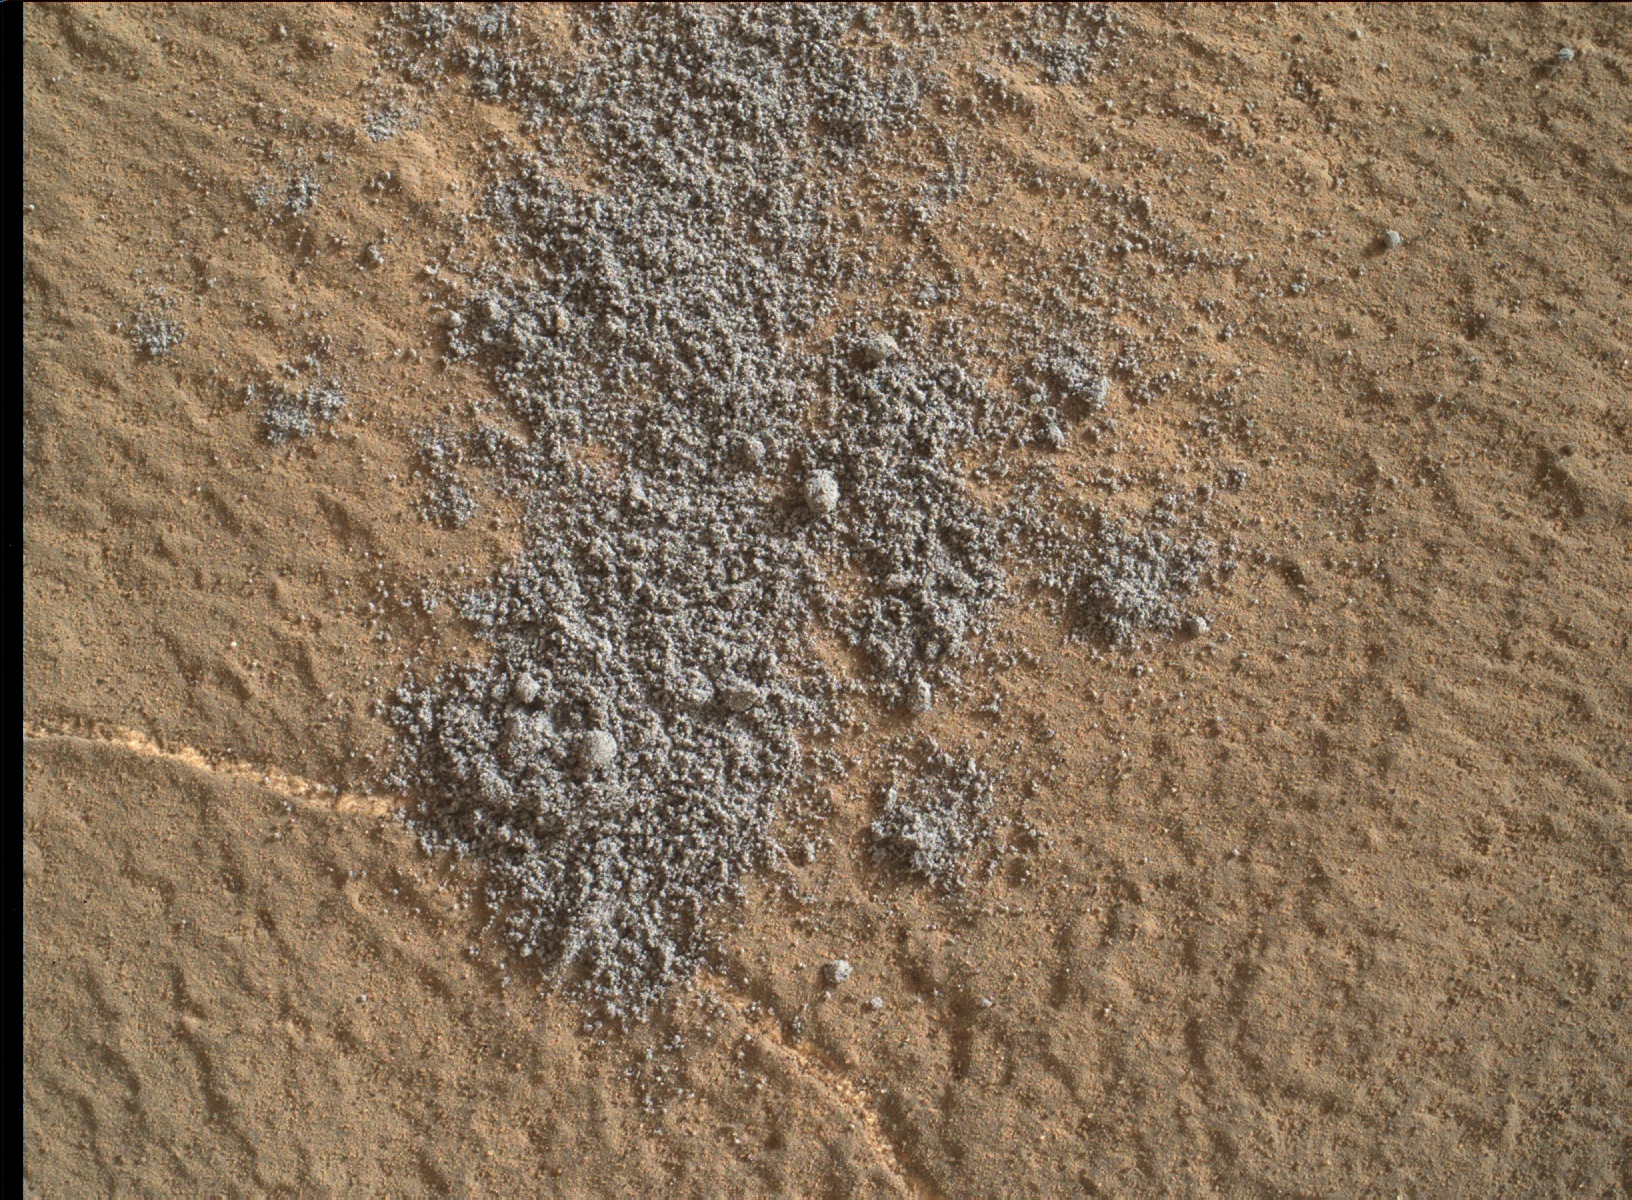 Nasa's Mars rover Curiosity acquired this image using its Mars Hand Lens Imager (MAHLI) on Sol 1419